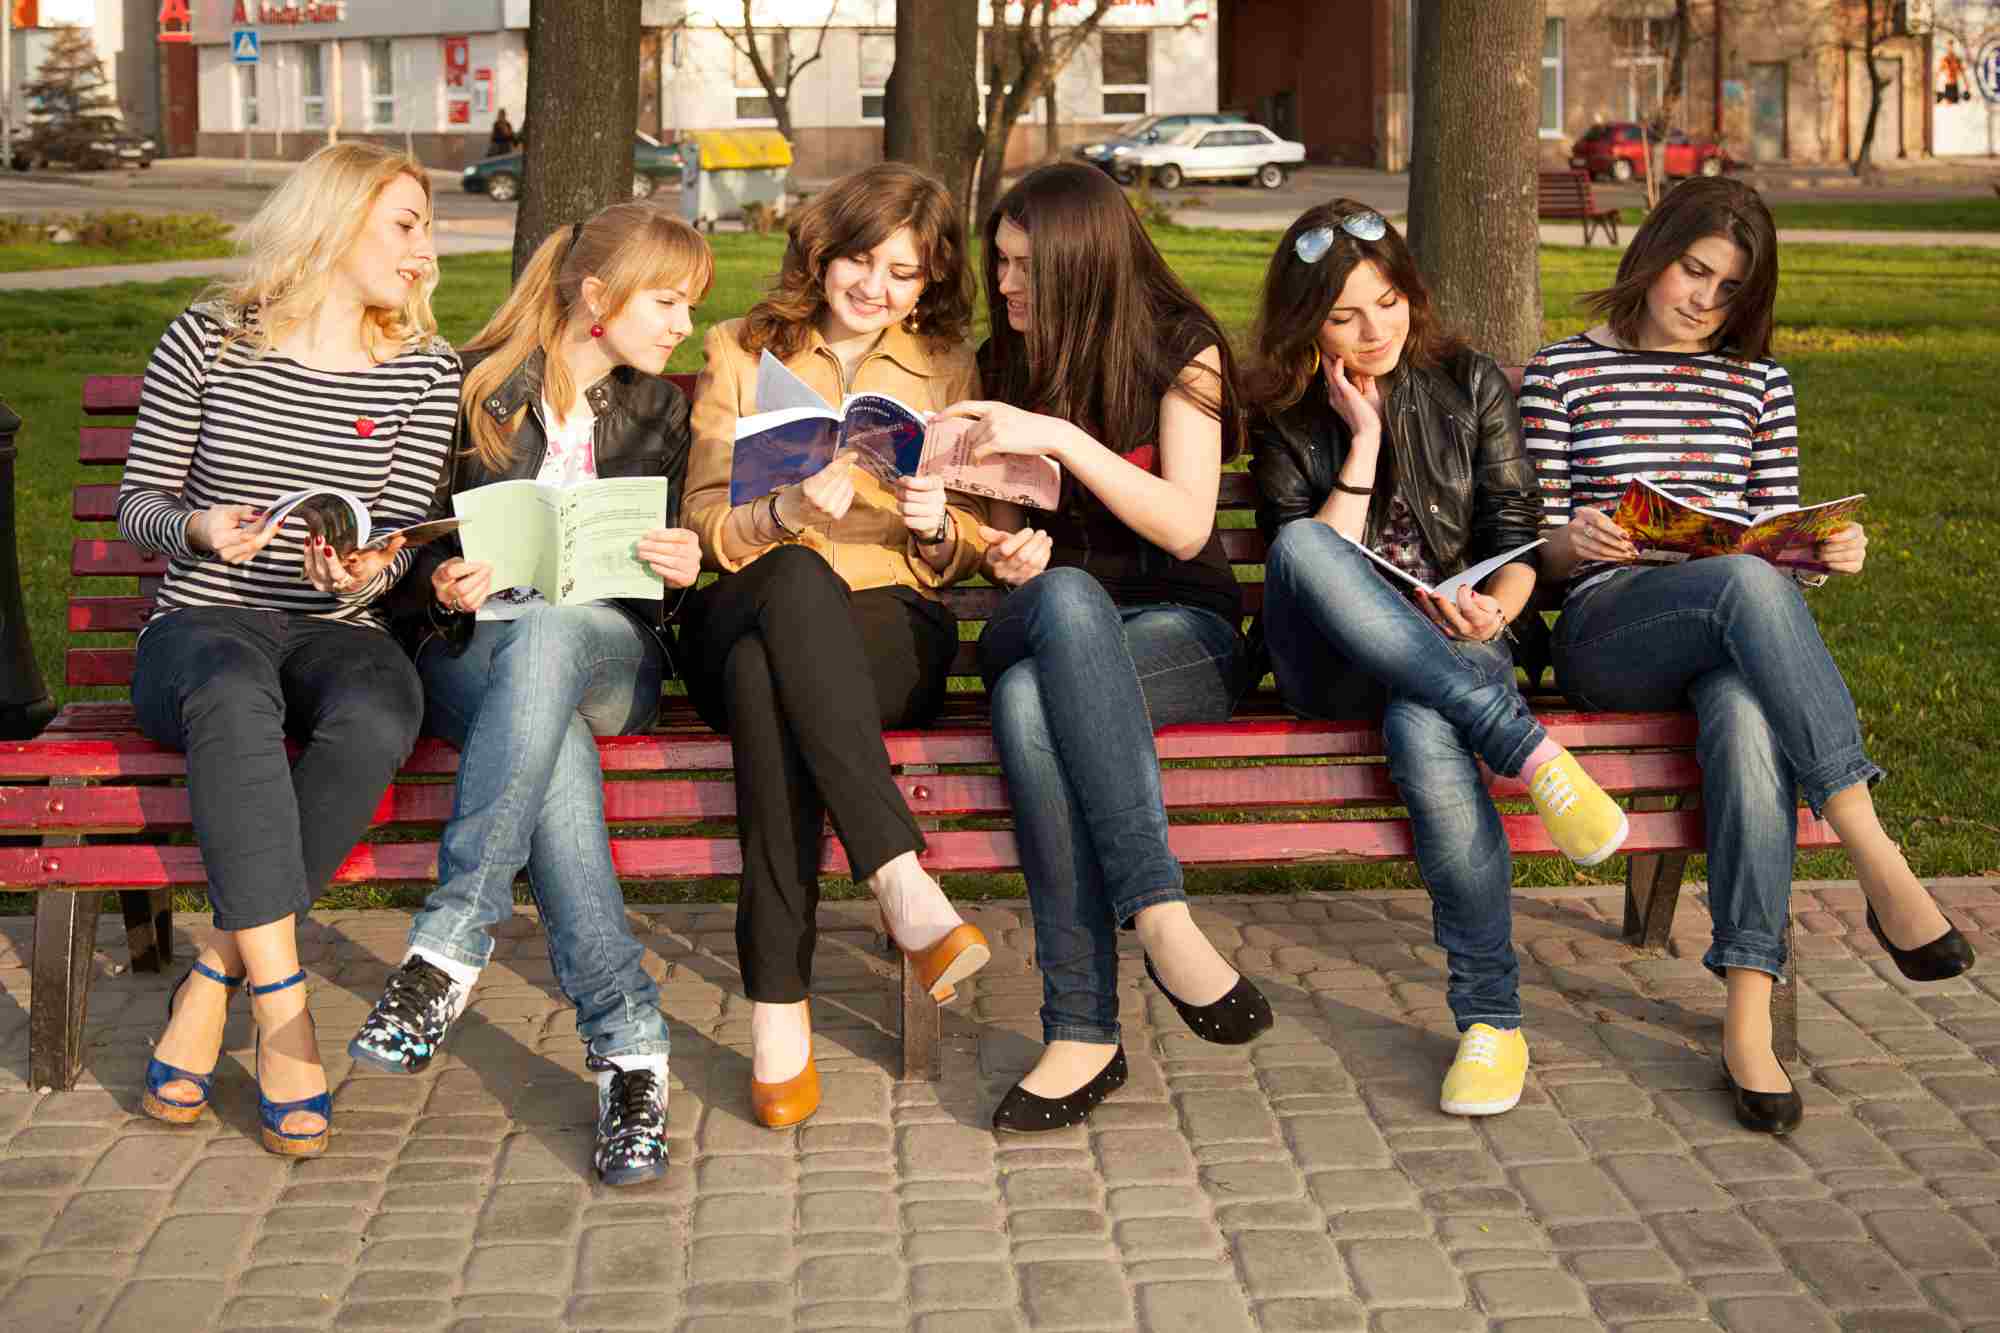 Group of women sitting on a bench, smiling and reading books